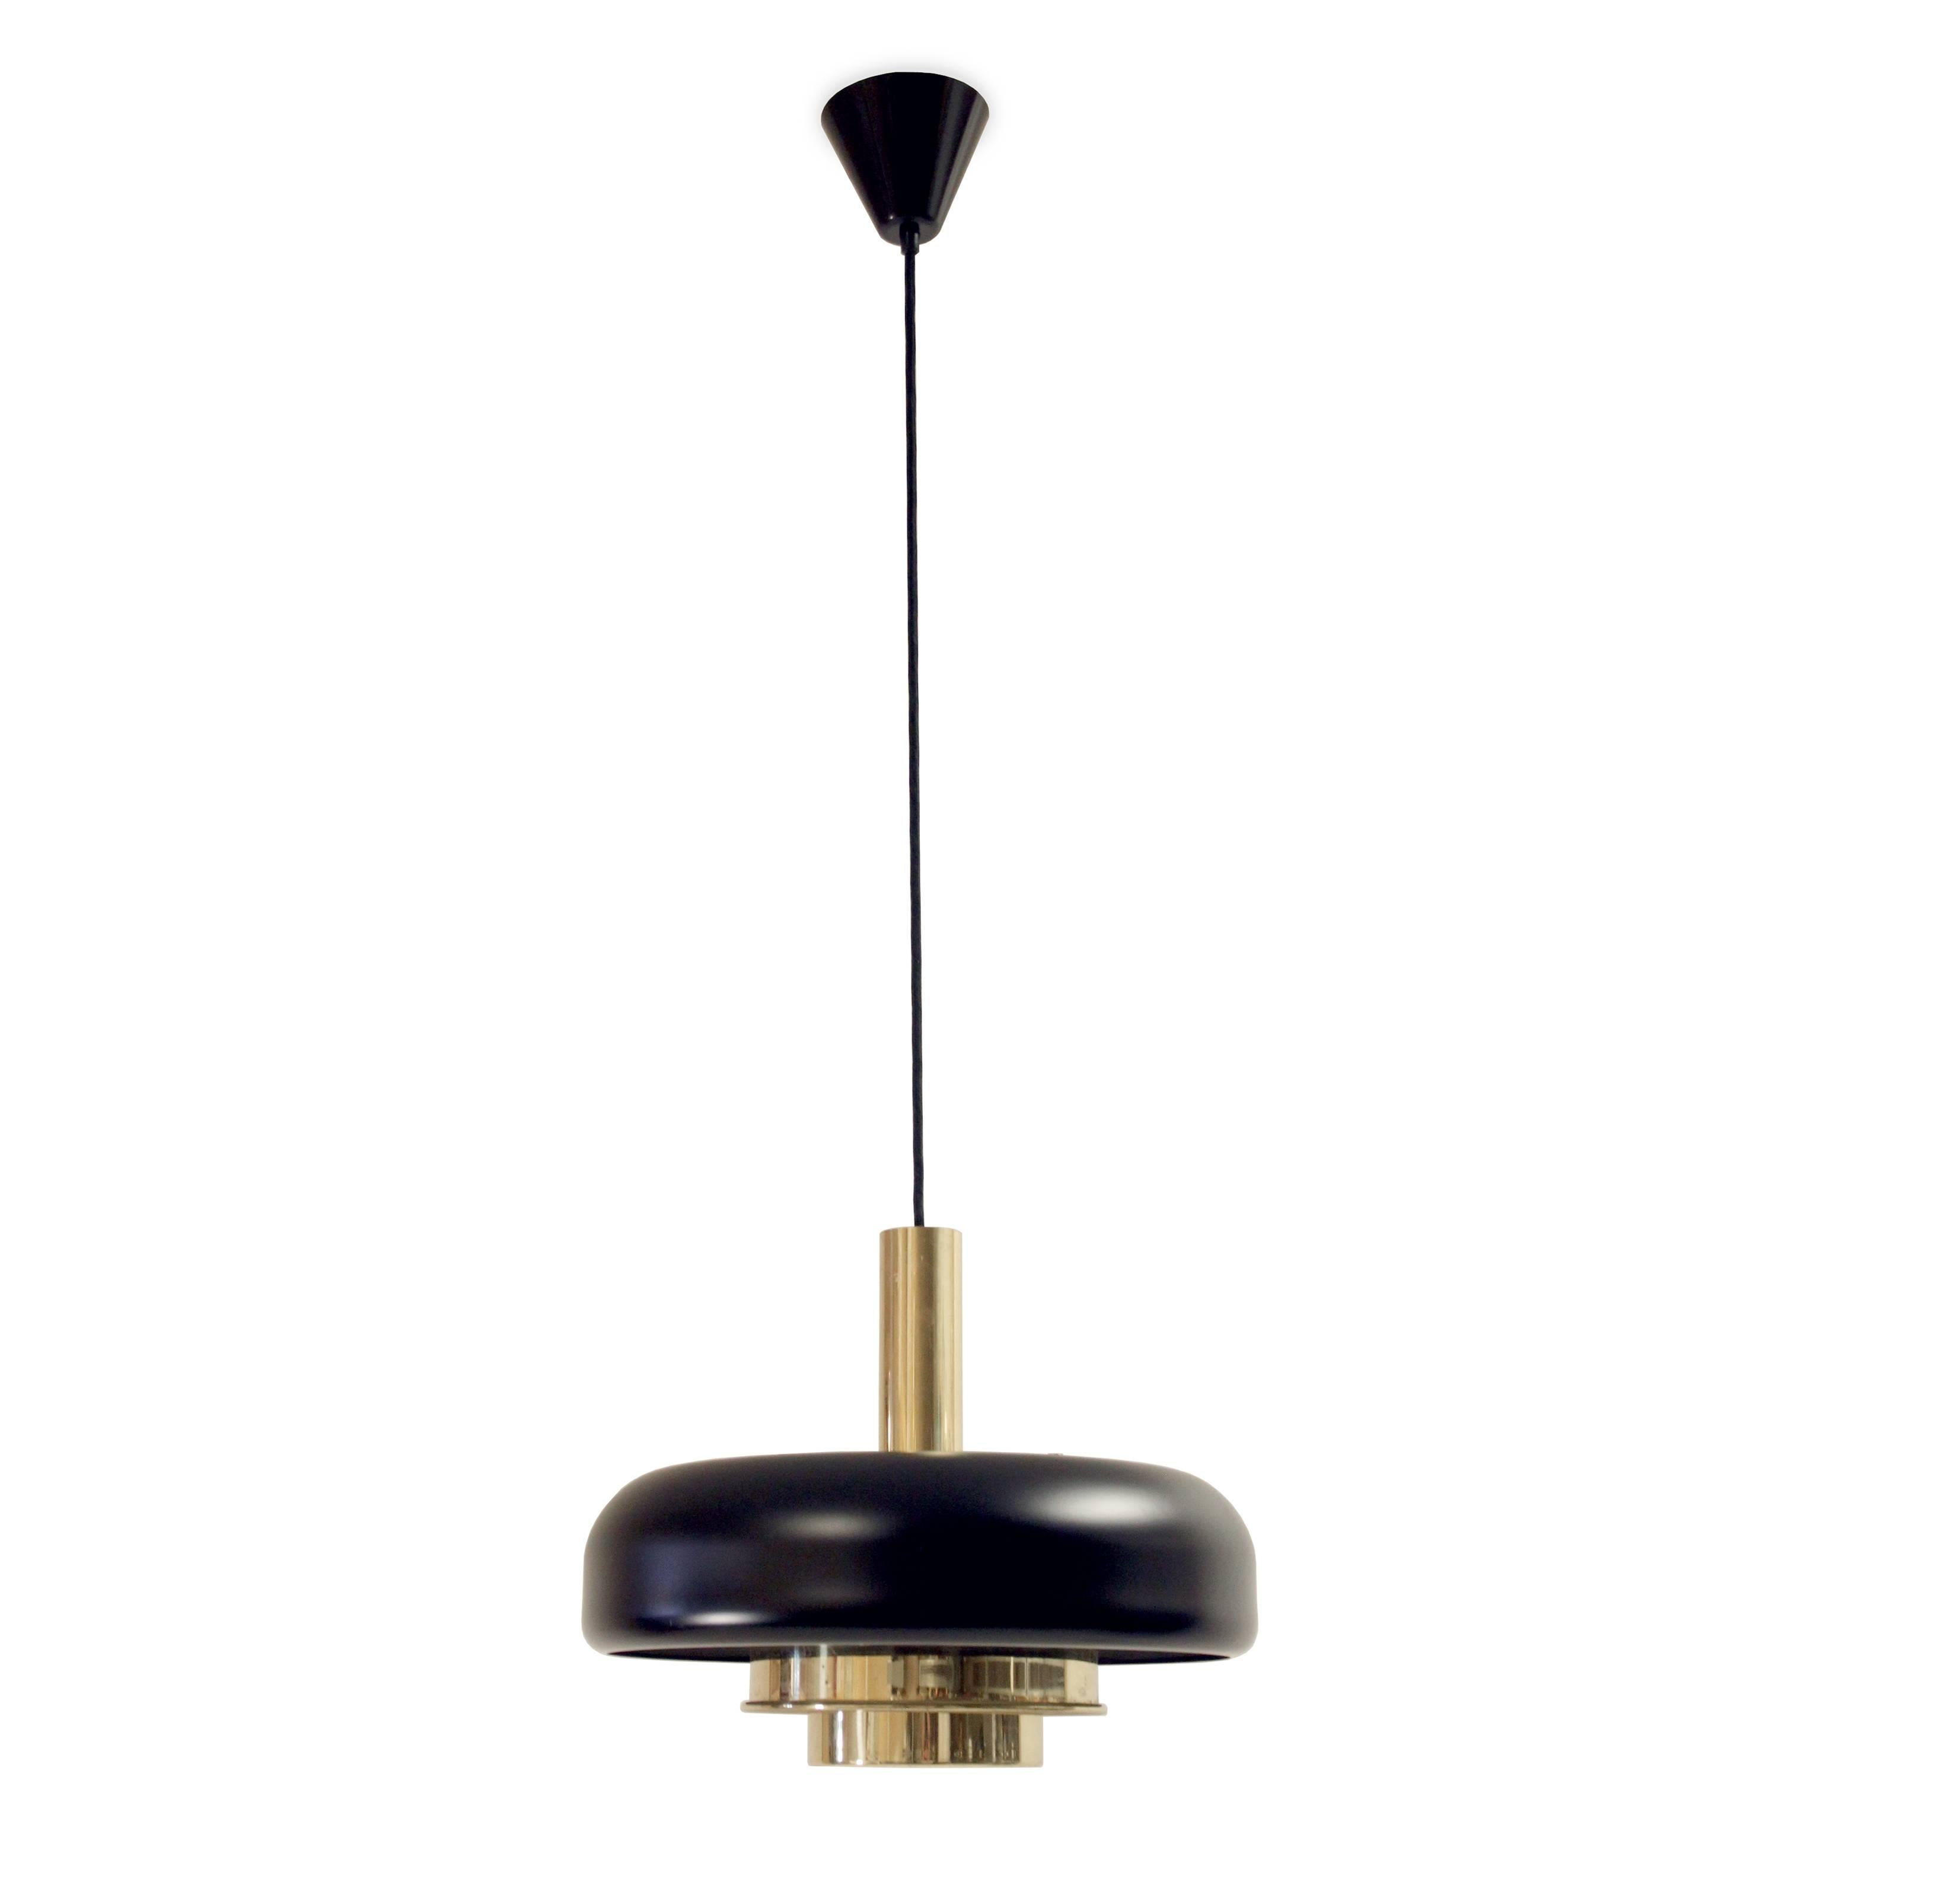 Sublime and wonderful ceiling light in black lacquered steel and brass. Designed by Jonas Hidle and made in Norway by Høvik Verk from circa 1960s second half. The lamp is fully working and in excellent vintage condition.